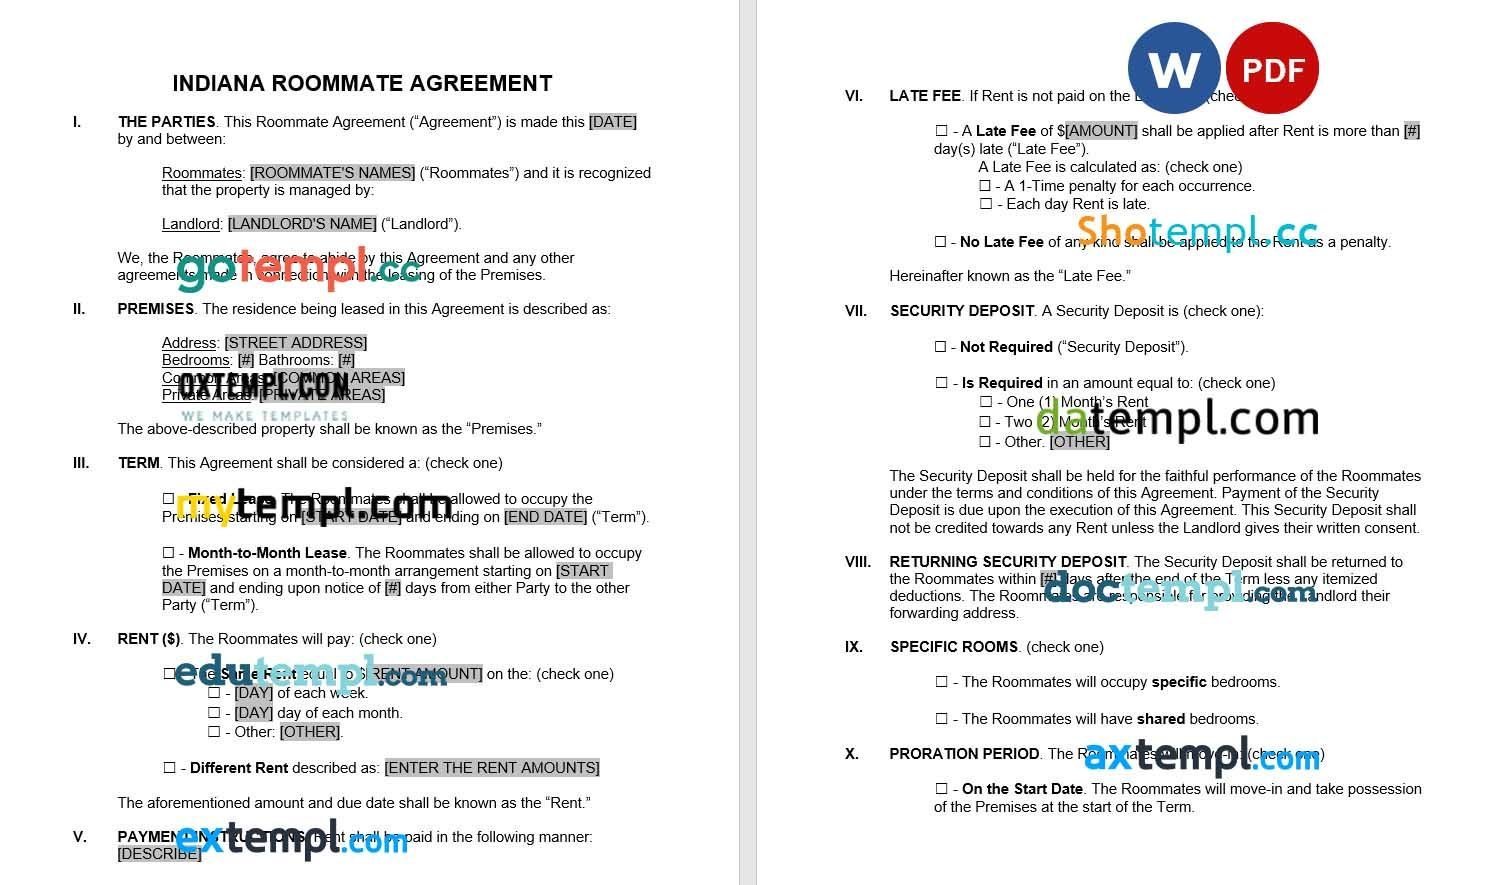 Indianna Roommate Agreement Form Word example, fully editable